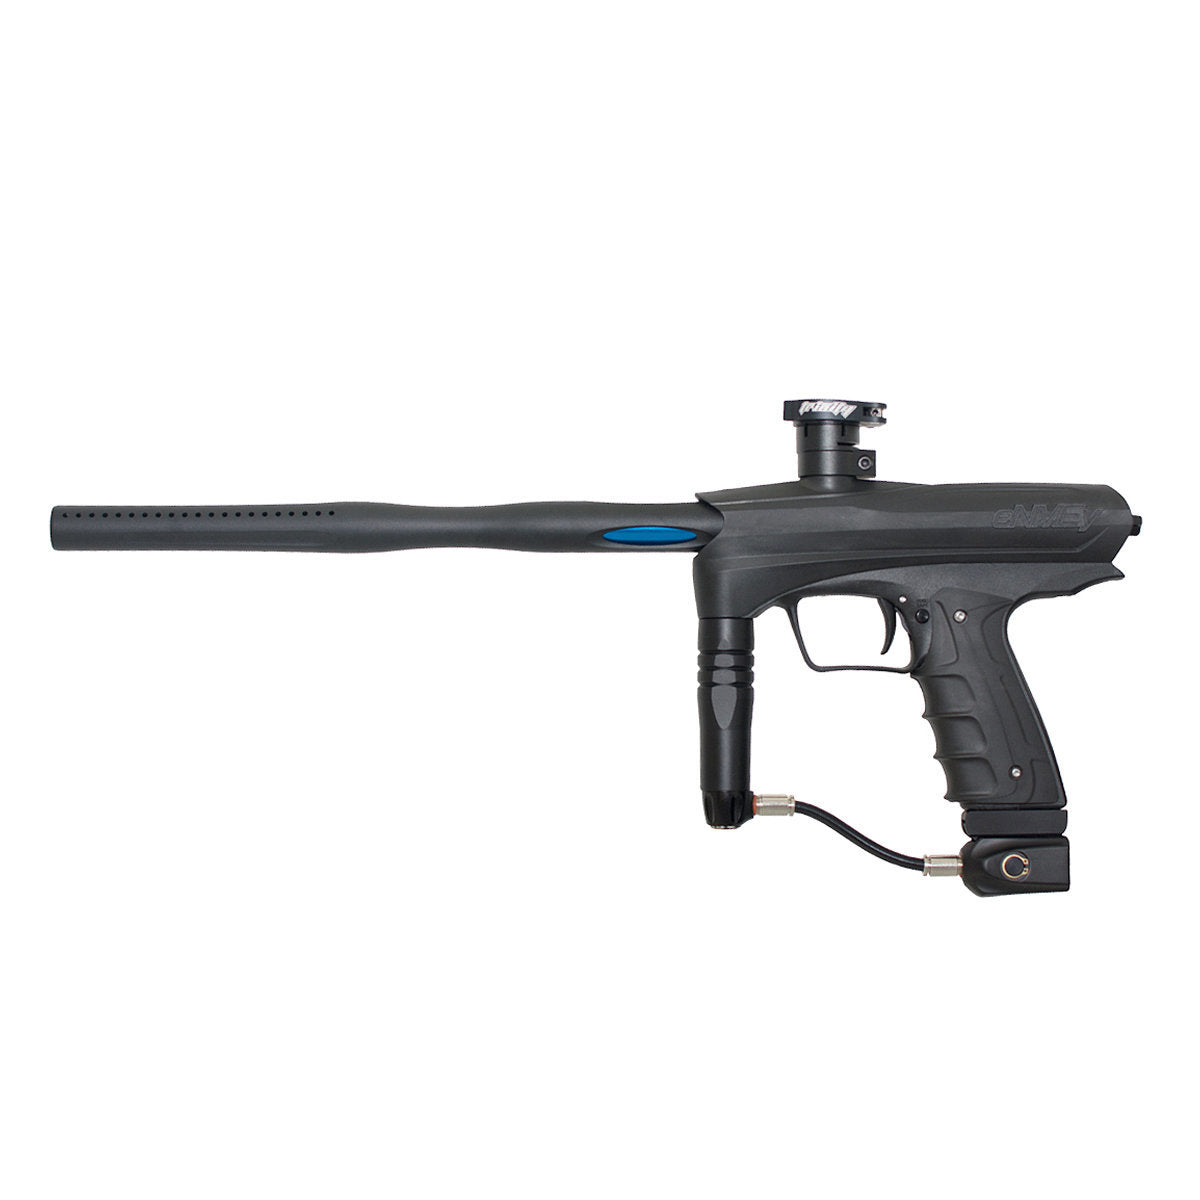 Gog Enmey Pro Paintball Gun | More Color Options | Paintball Marker